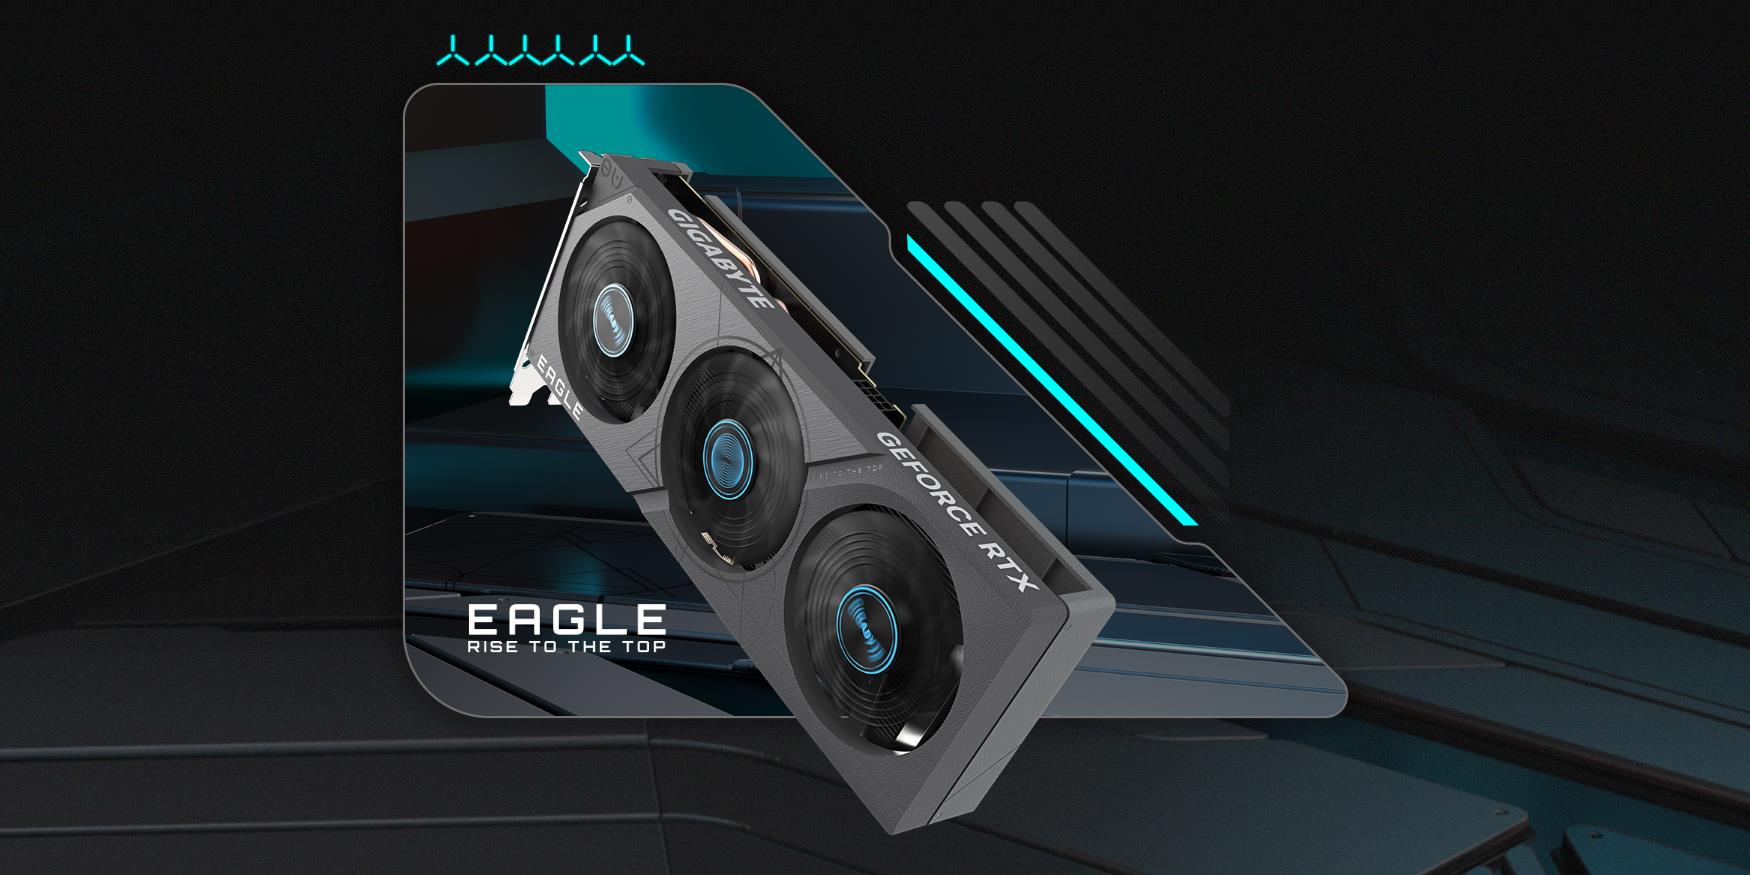 A large marketing image providing additional information about the product Gigabyte GeForce RTX 4060 Eagle OC 8GB GDDR6 - Additional alt info not provided